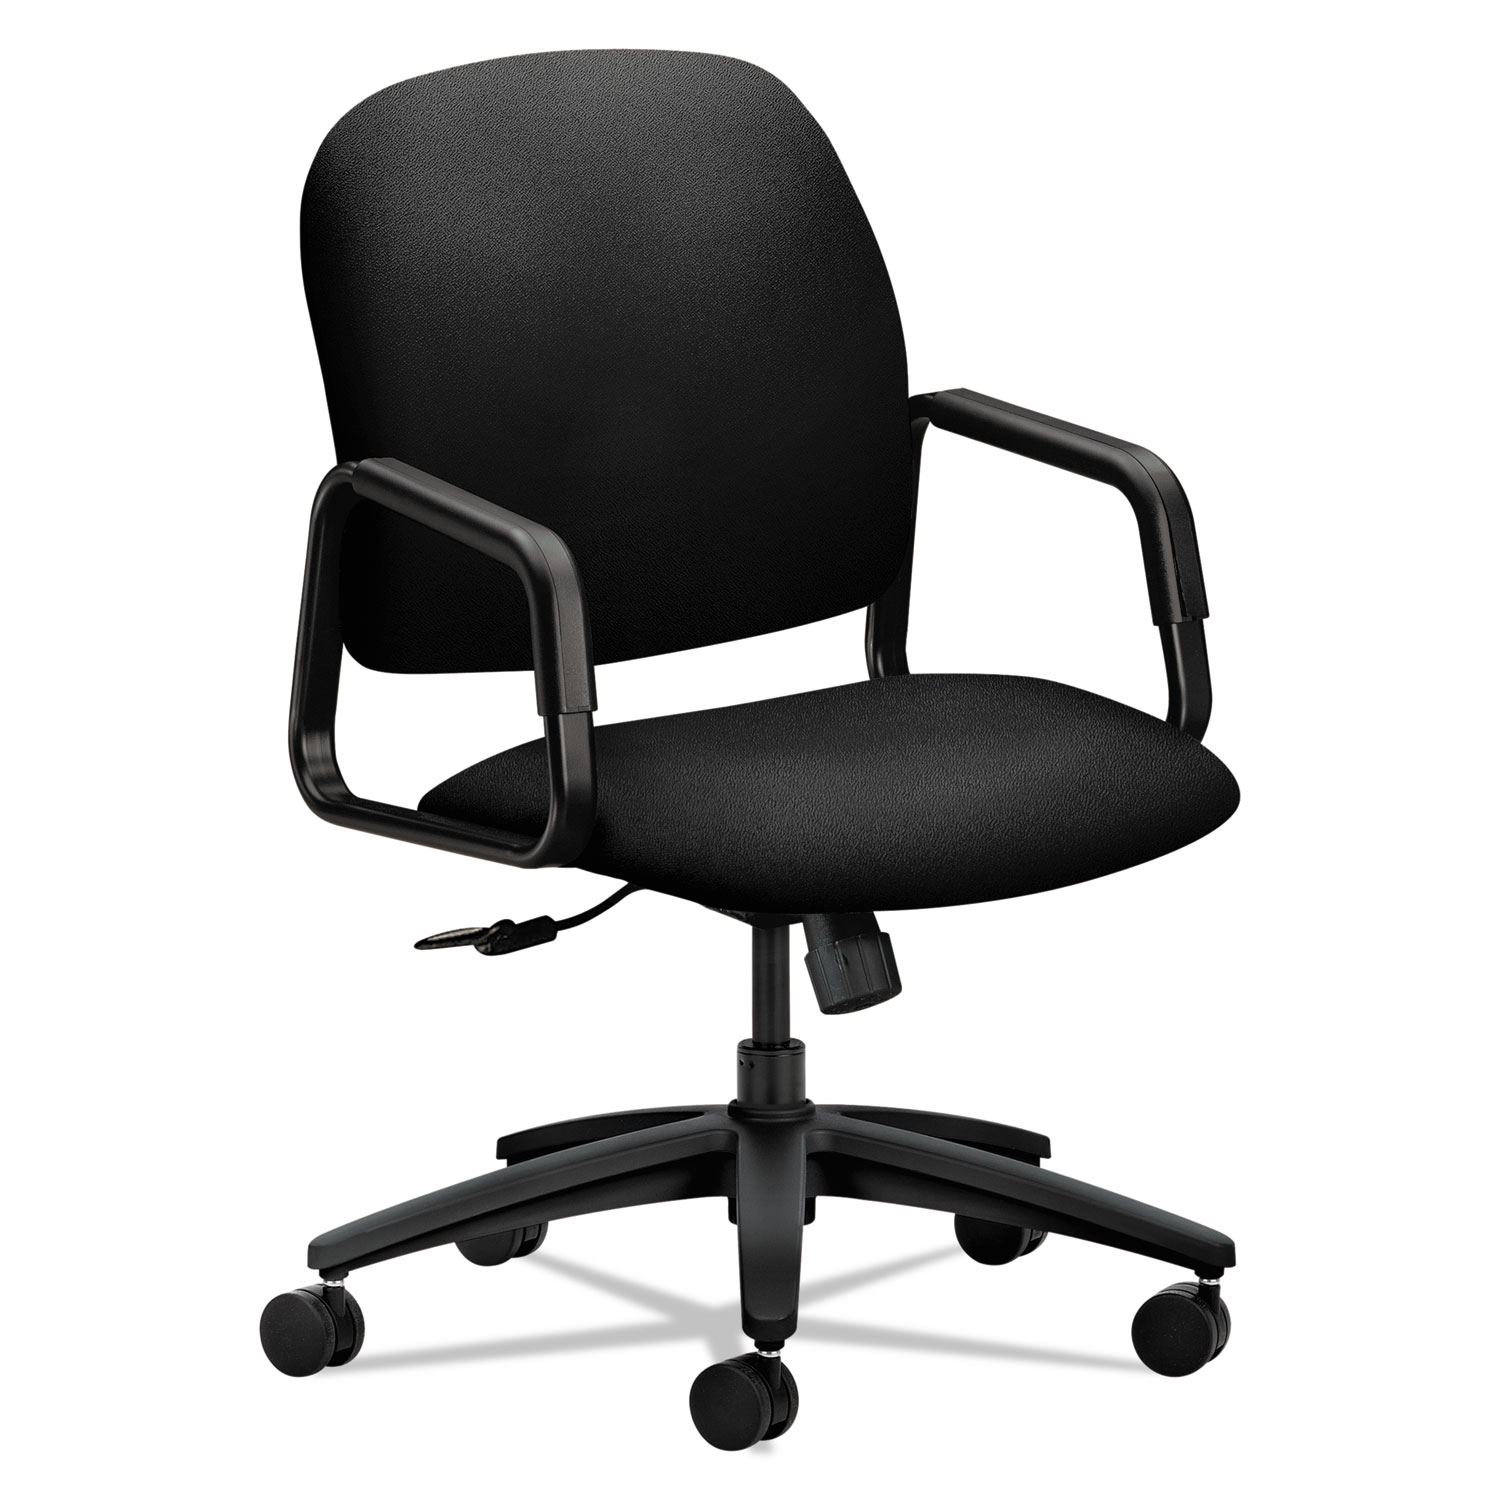 Solutions Seating 4000 Series Executive High-Back Chair, Black